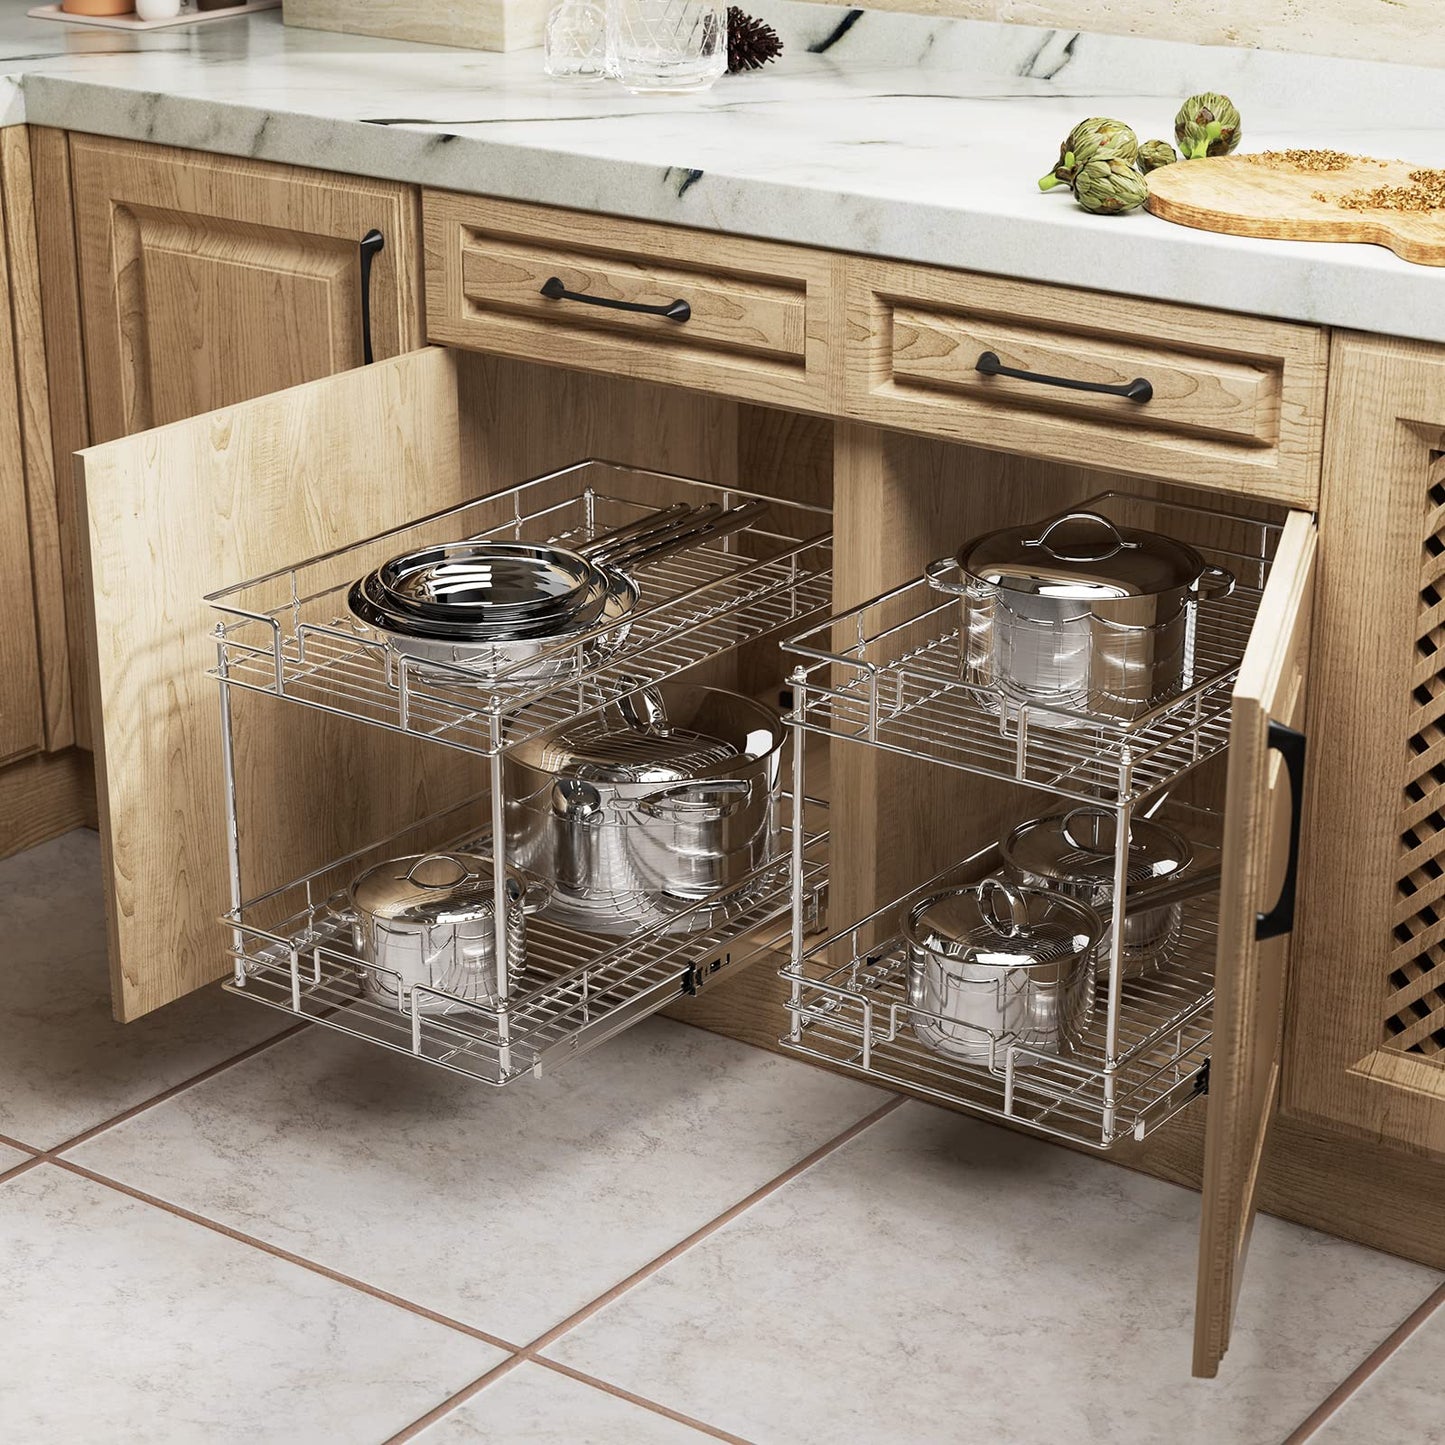 2-Tier Pull Out Drawers For Kitchen Cabinets